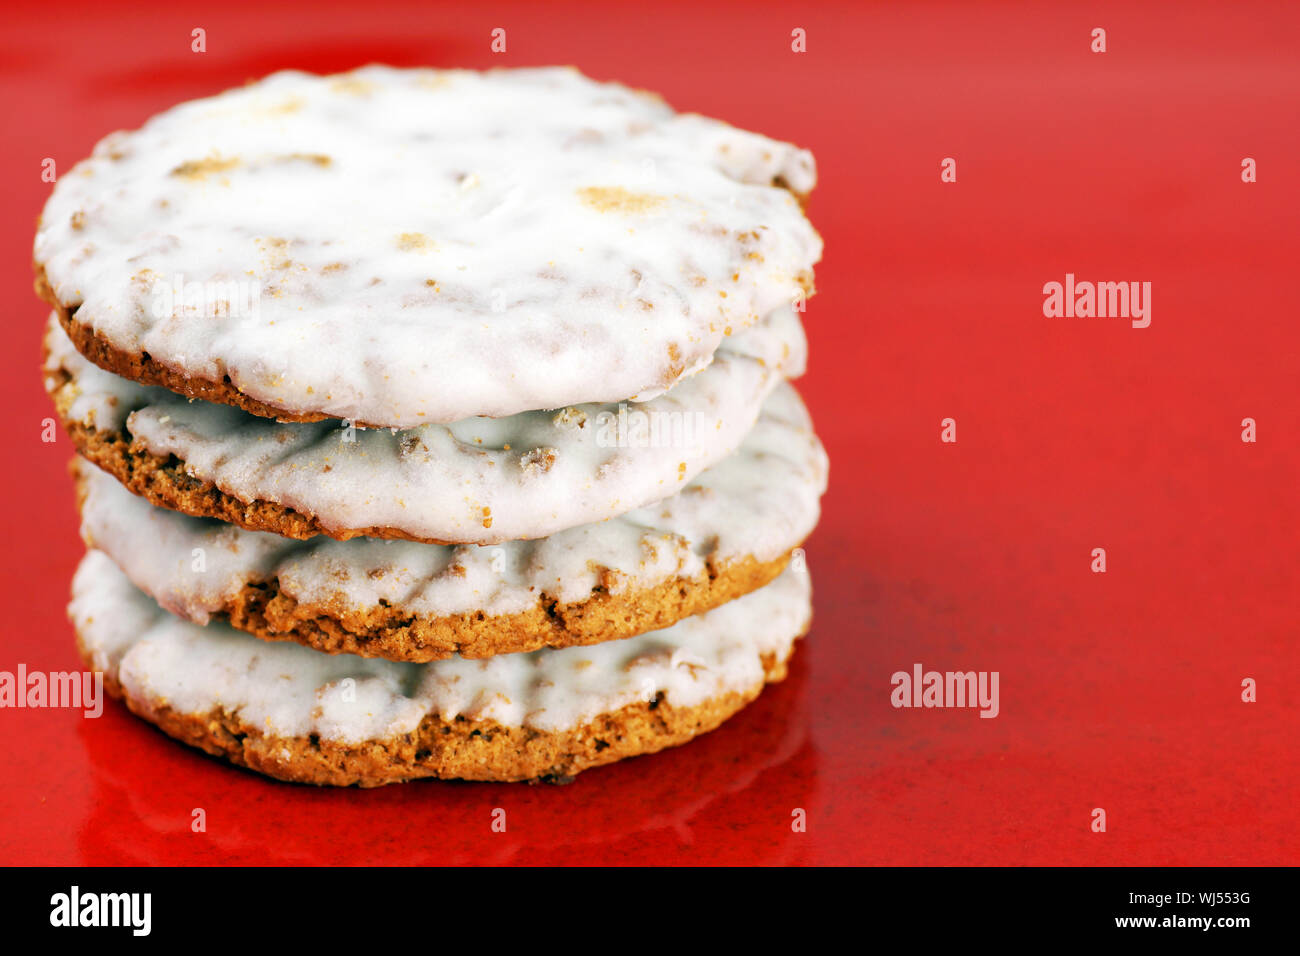 Pile of oatmeal cookies with sugar icing on red plate background Stock Photo